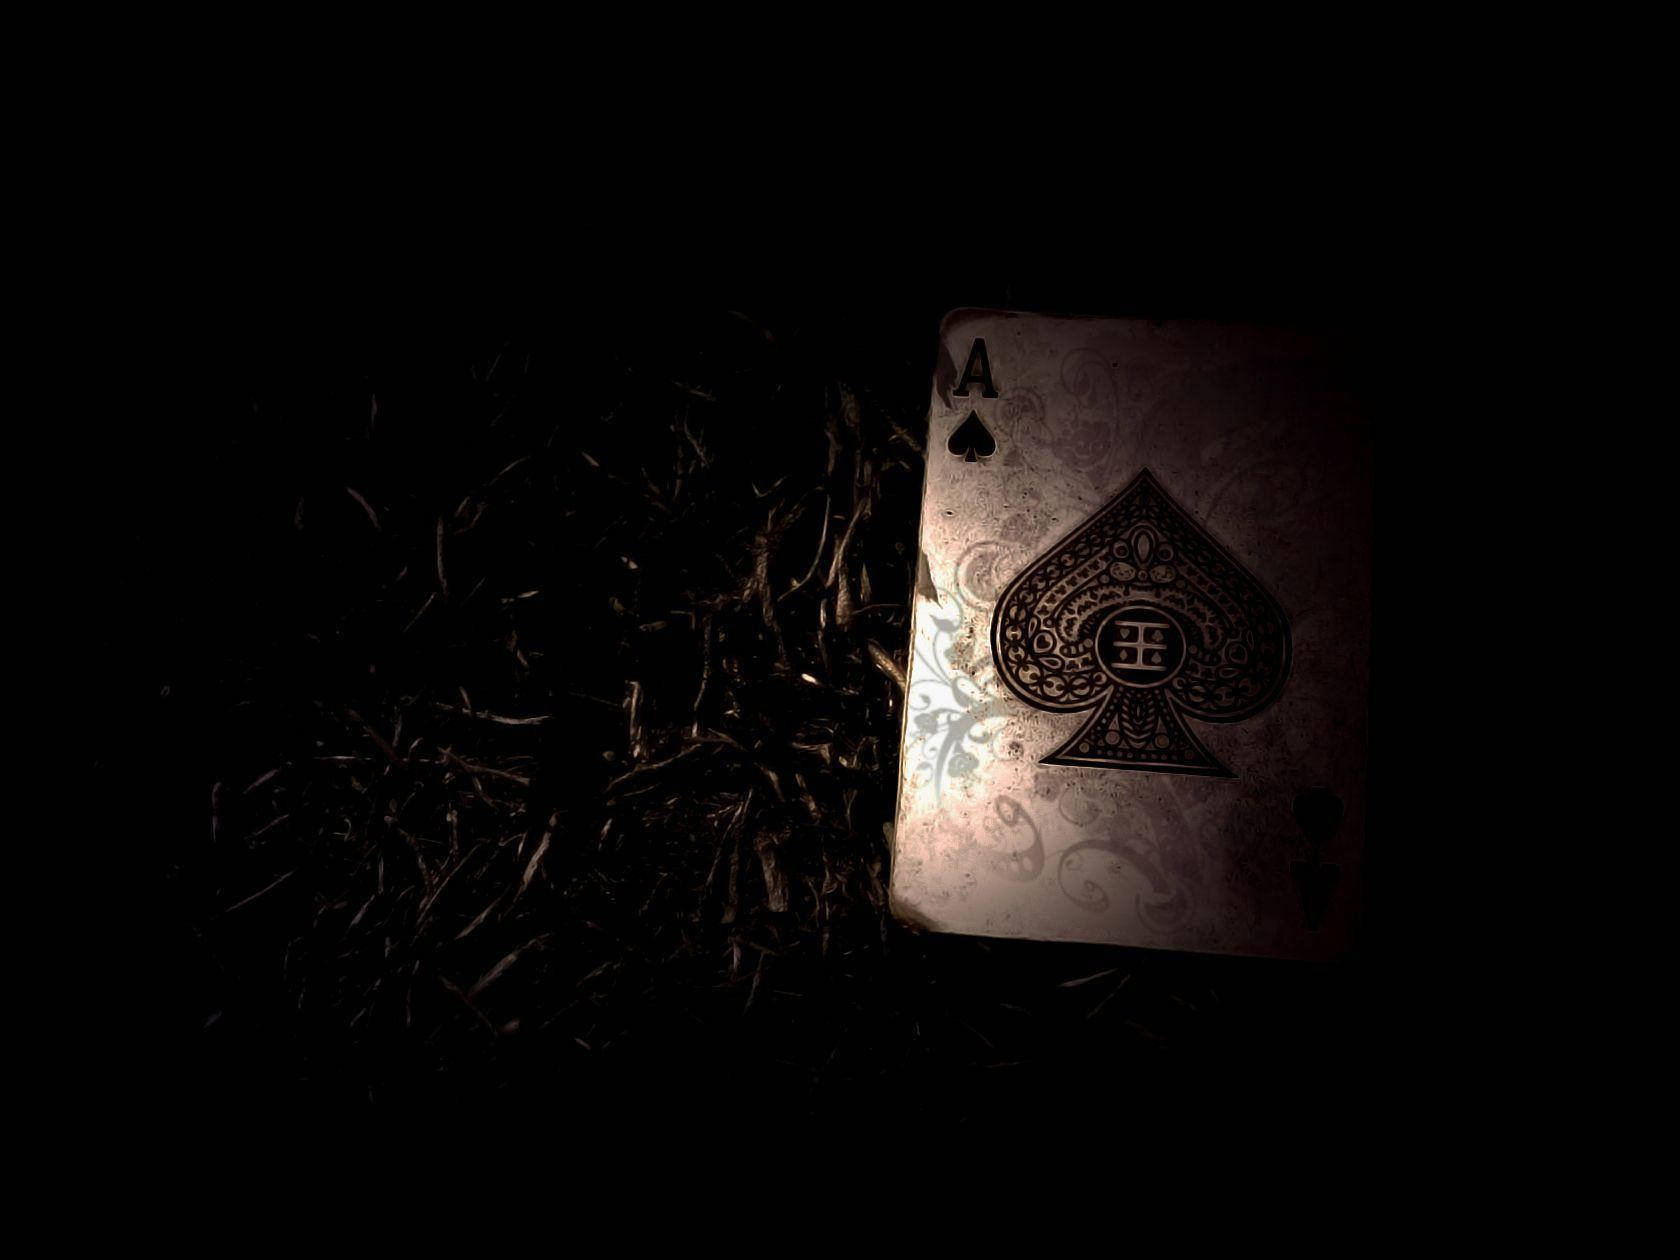 A Playing Card Is Sitting On The Ground In The Dark Wallpaper